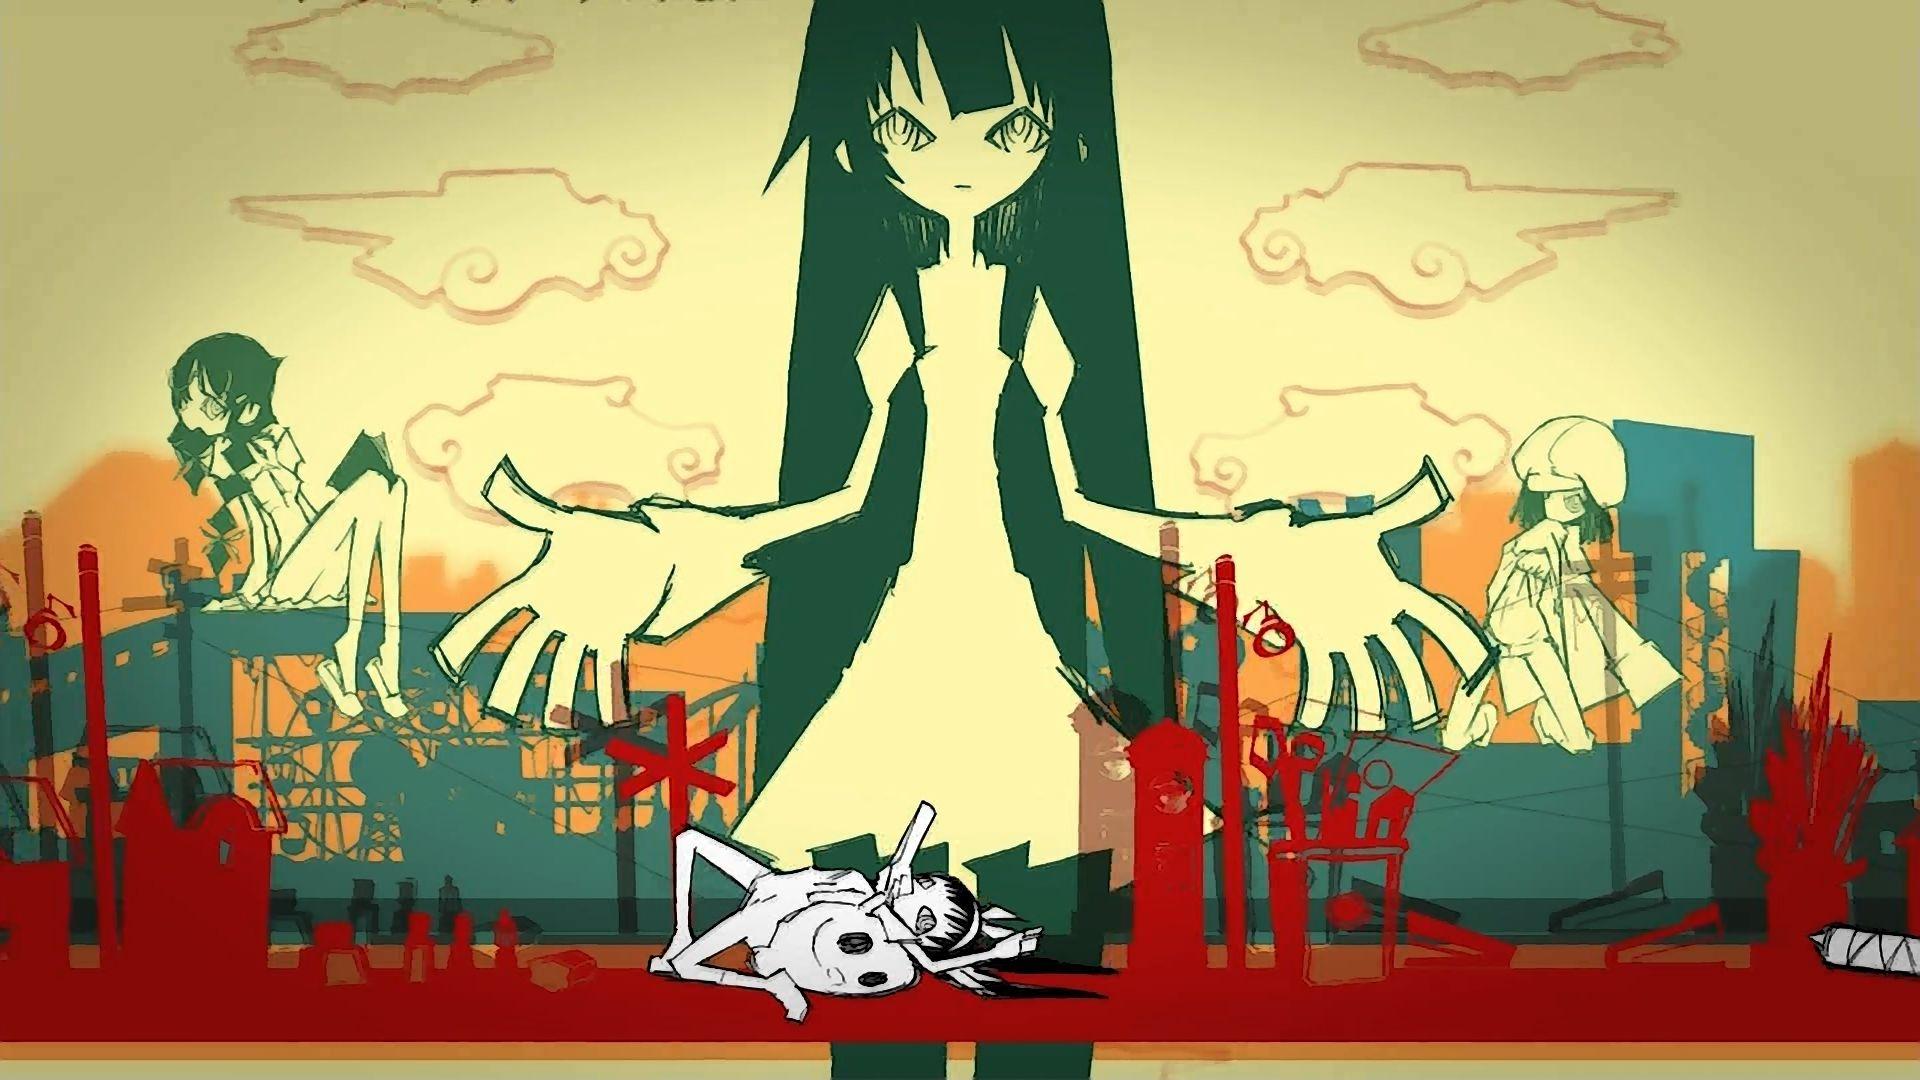 2000 Monogatari Series HD Wallpapers and Backgrounds